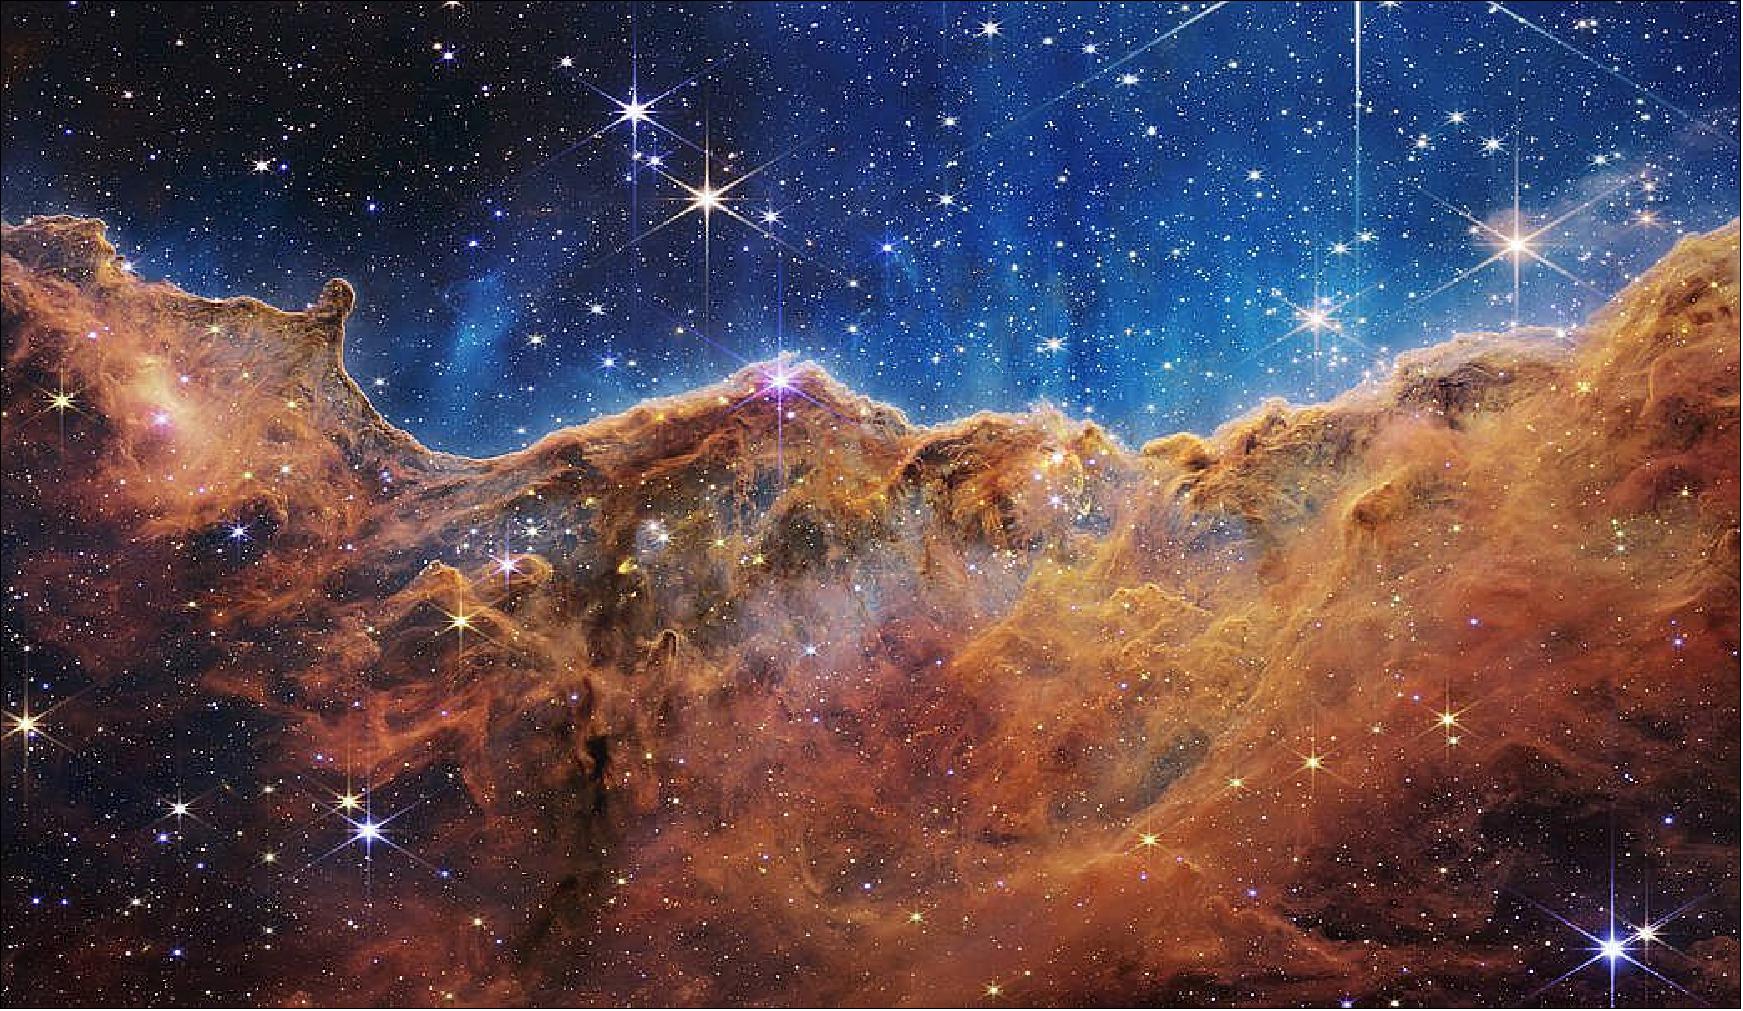 Figure 9: One of the first images captured by the James Webb Space Telescope, this landscape of "mountains" and "valleys" speckled with glittering stars is actually the edge of a nearby young star-forming region called NGC 3324 in the Carina Nebula (image credits: NASA, ESA, CSA, and STScI)